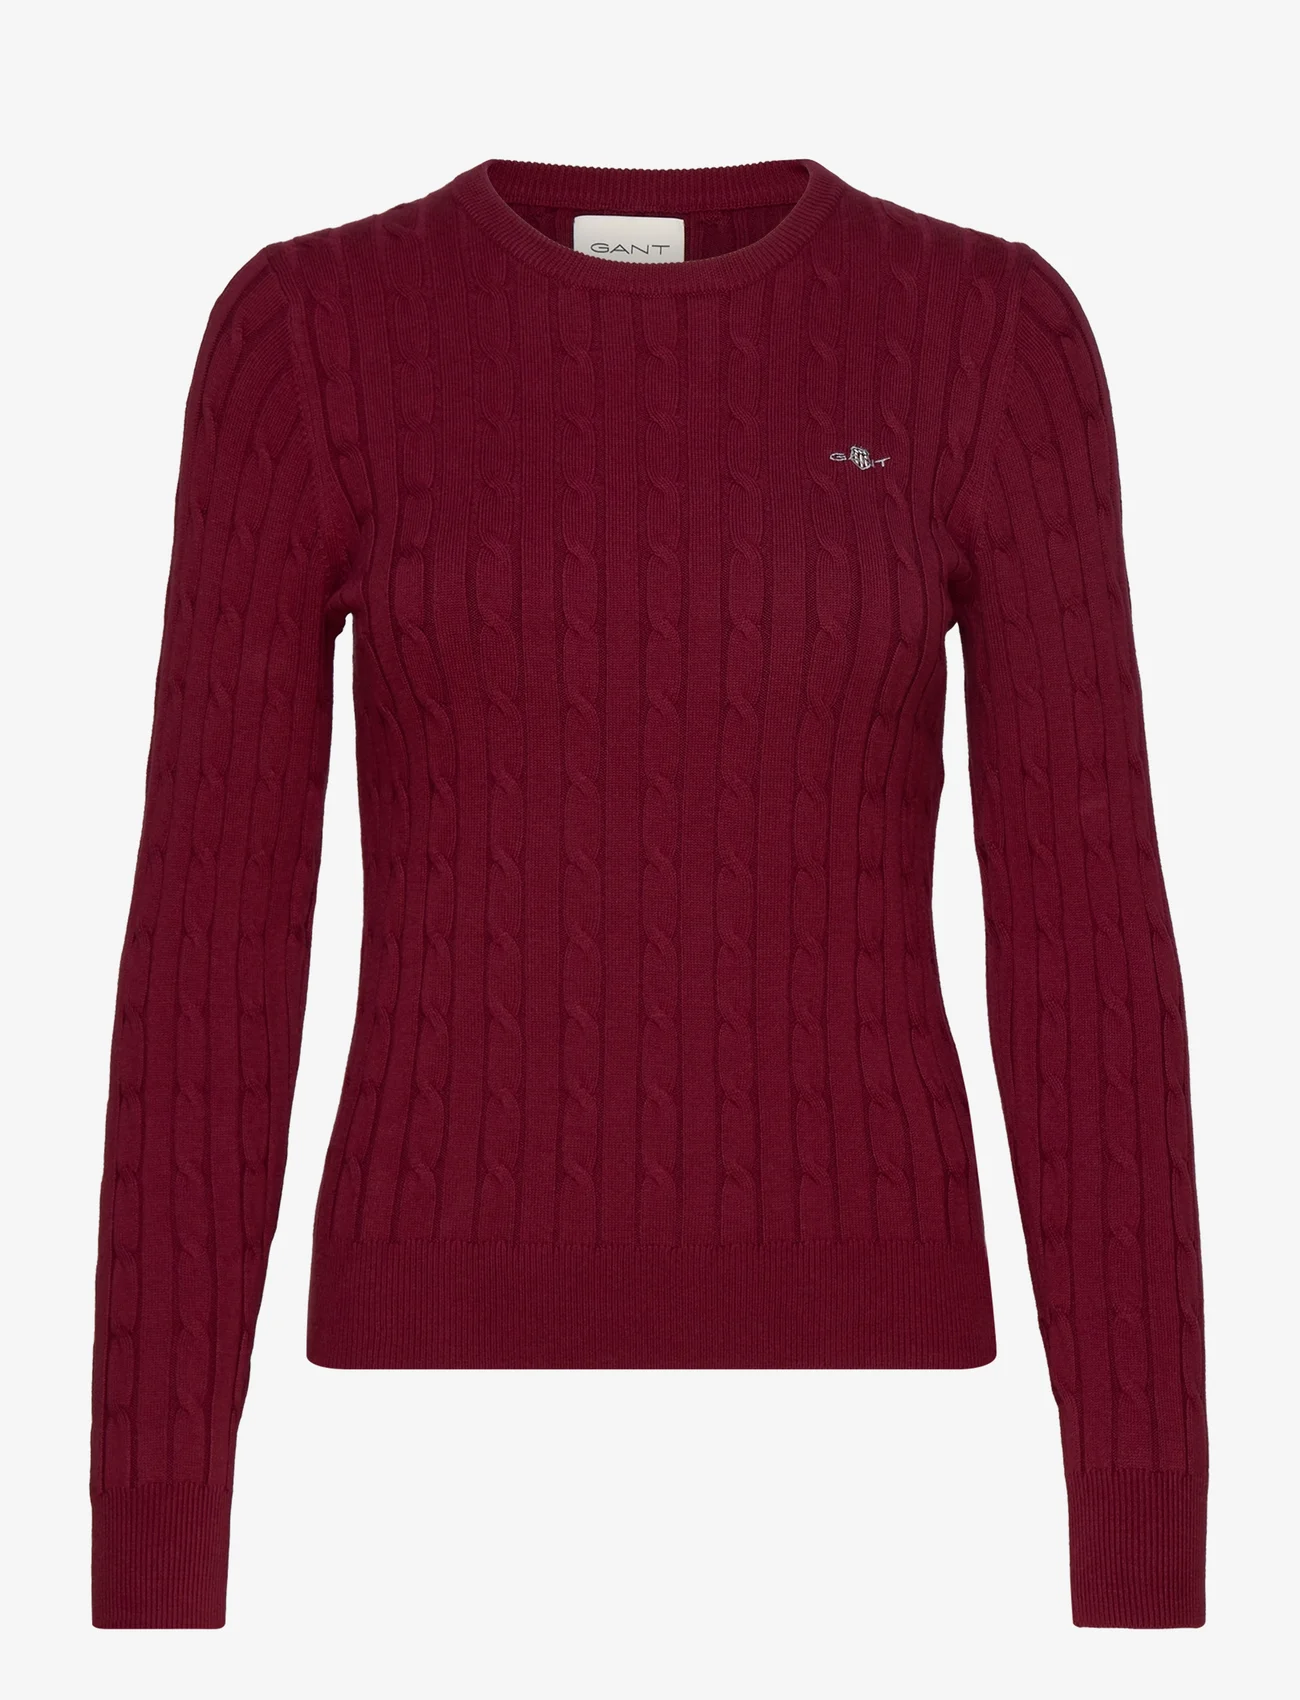 GANT - STRETCH COTTON CABLE C-NECK - pullover - plumped red - 0